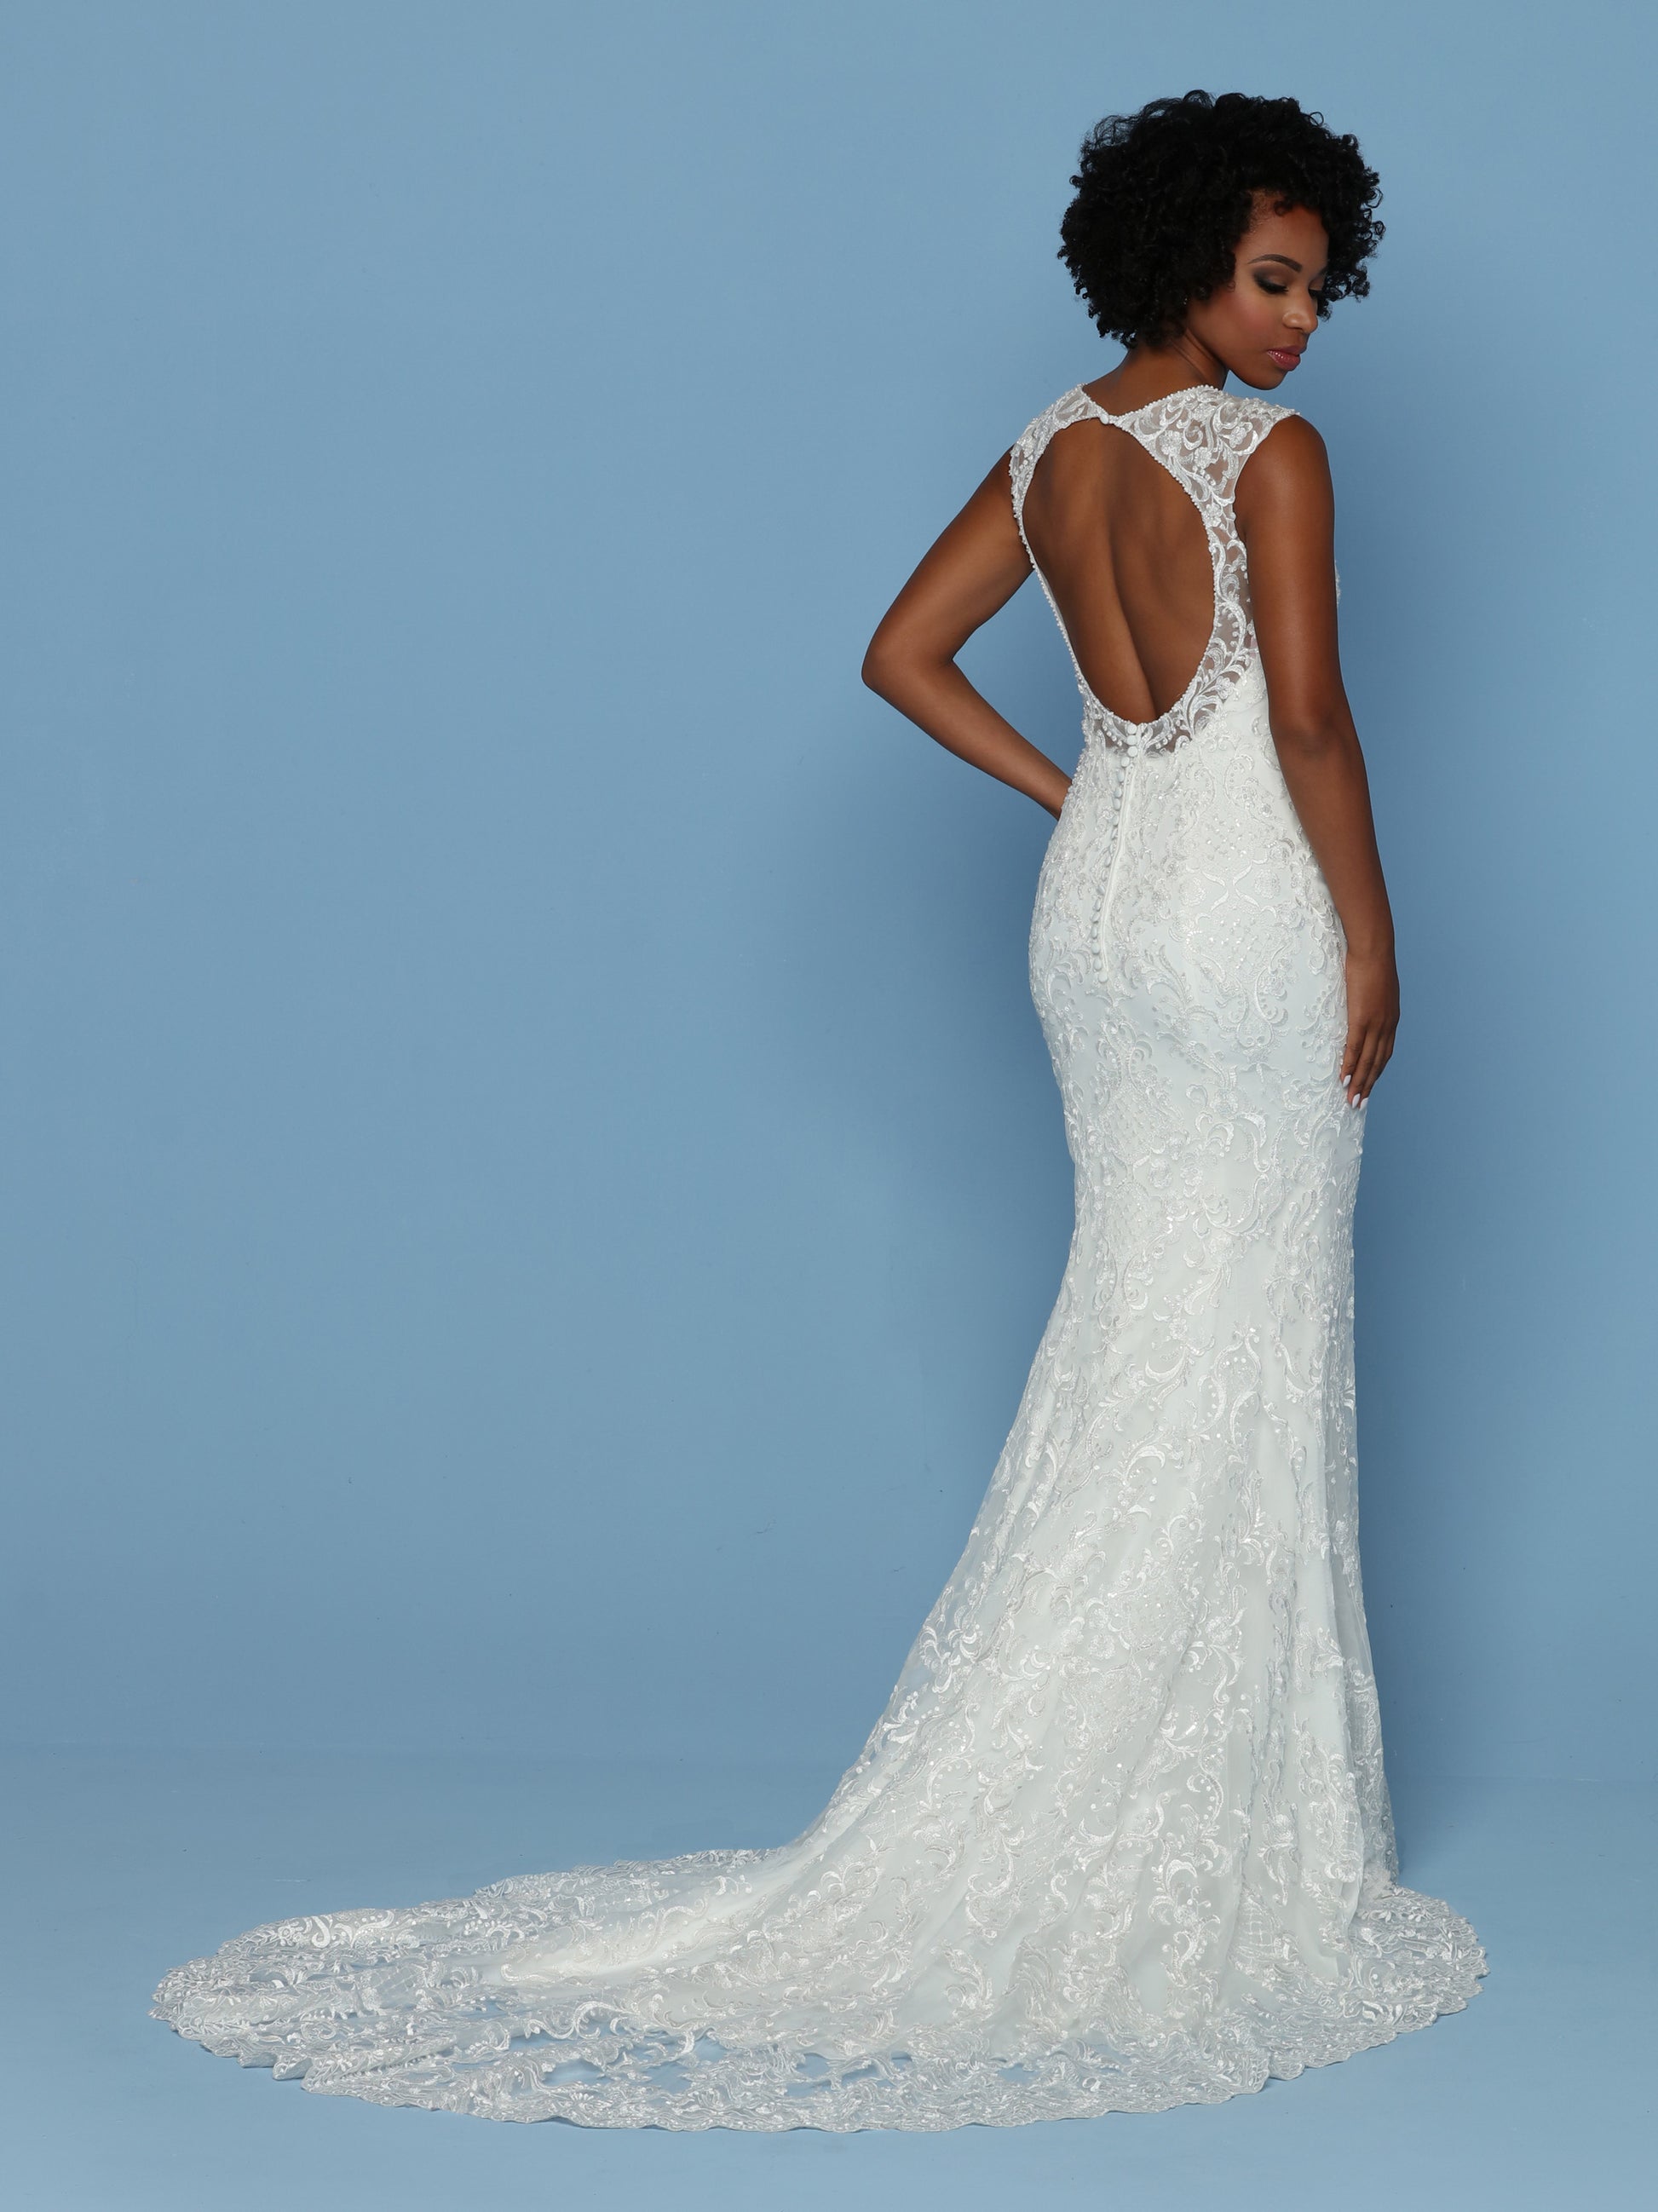 Davinci Bridal 50546 is an Embroidered Tulle Fitted Mermaid Silhouette. V Neckline with Sheer Embellished Cap Sleeve leading to a Sheer Illusion Keyhole Cutout Open Back.Button lined Zipper seam, Train with Embroidered lace edge.  Available for 1-2 Week Delivery!!!  Available Sizes: 2,4,6,8,10,12,14,16,18,20  Available Colors: Ivory